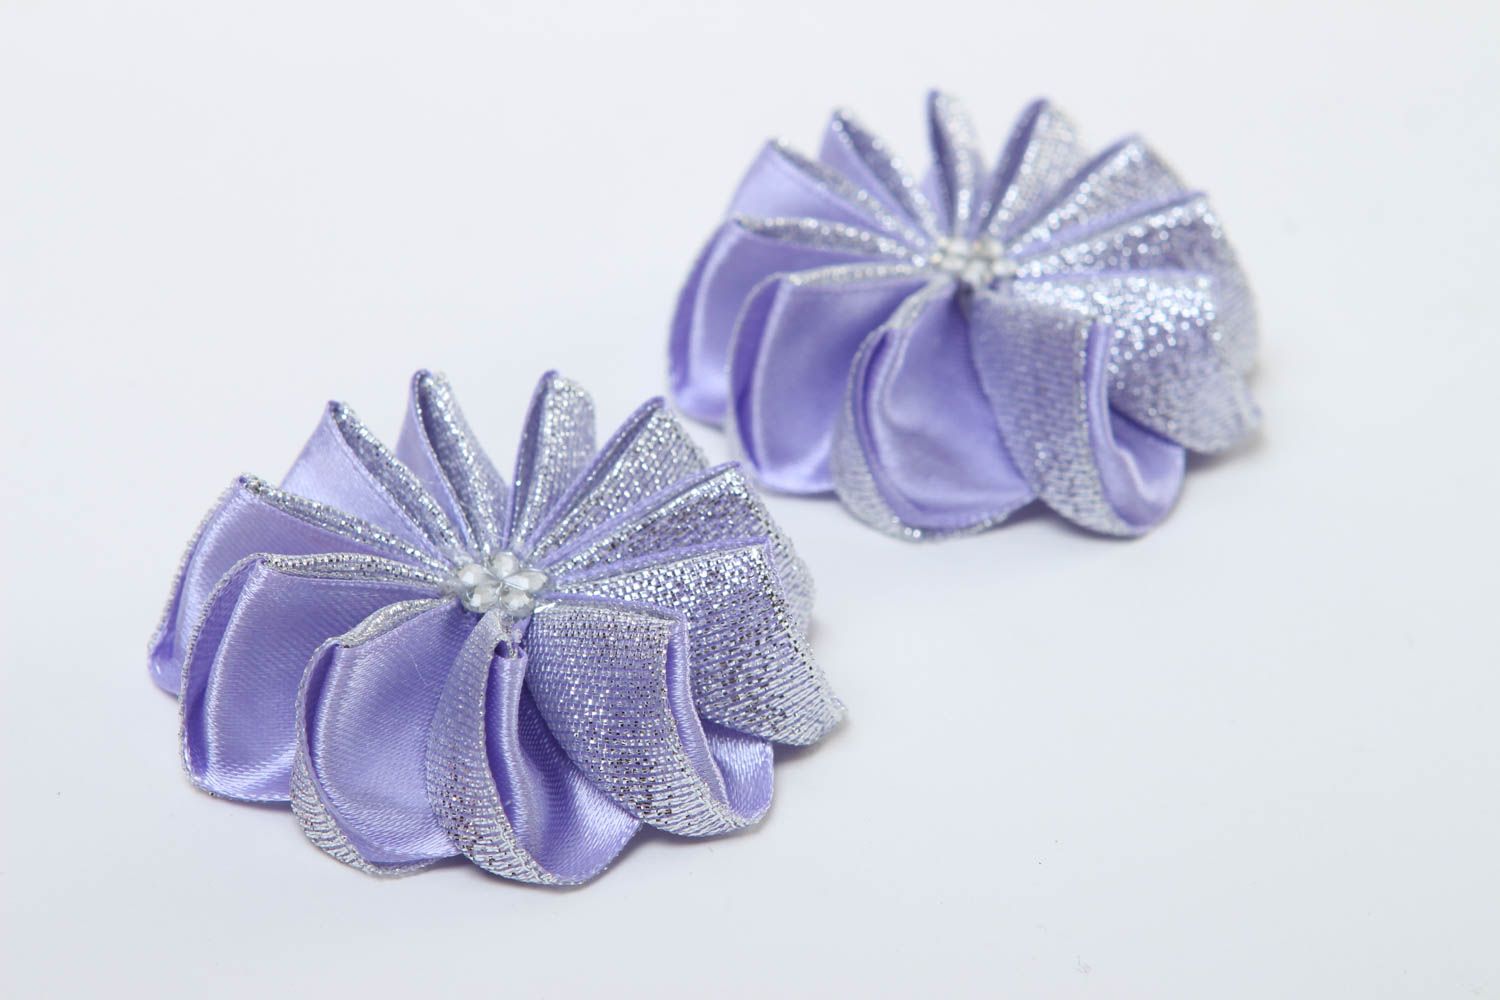 Satin ribbon flower fabric flowers kanzashi style flowers fittings for jewelry photo 3